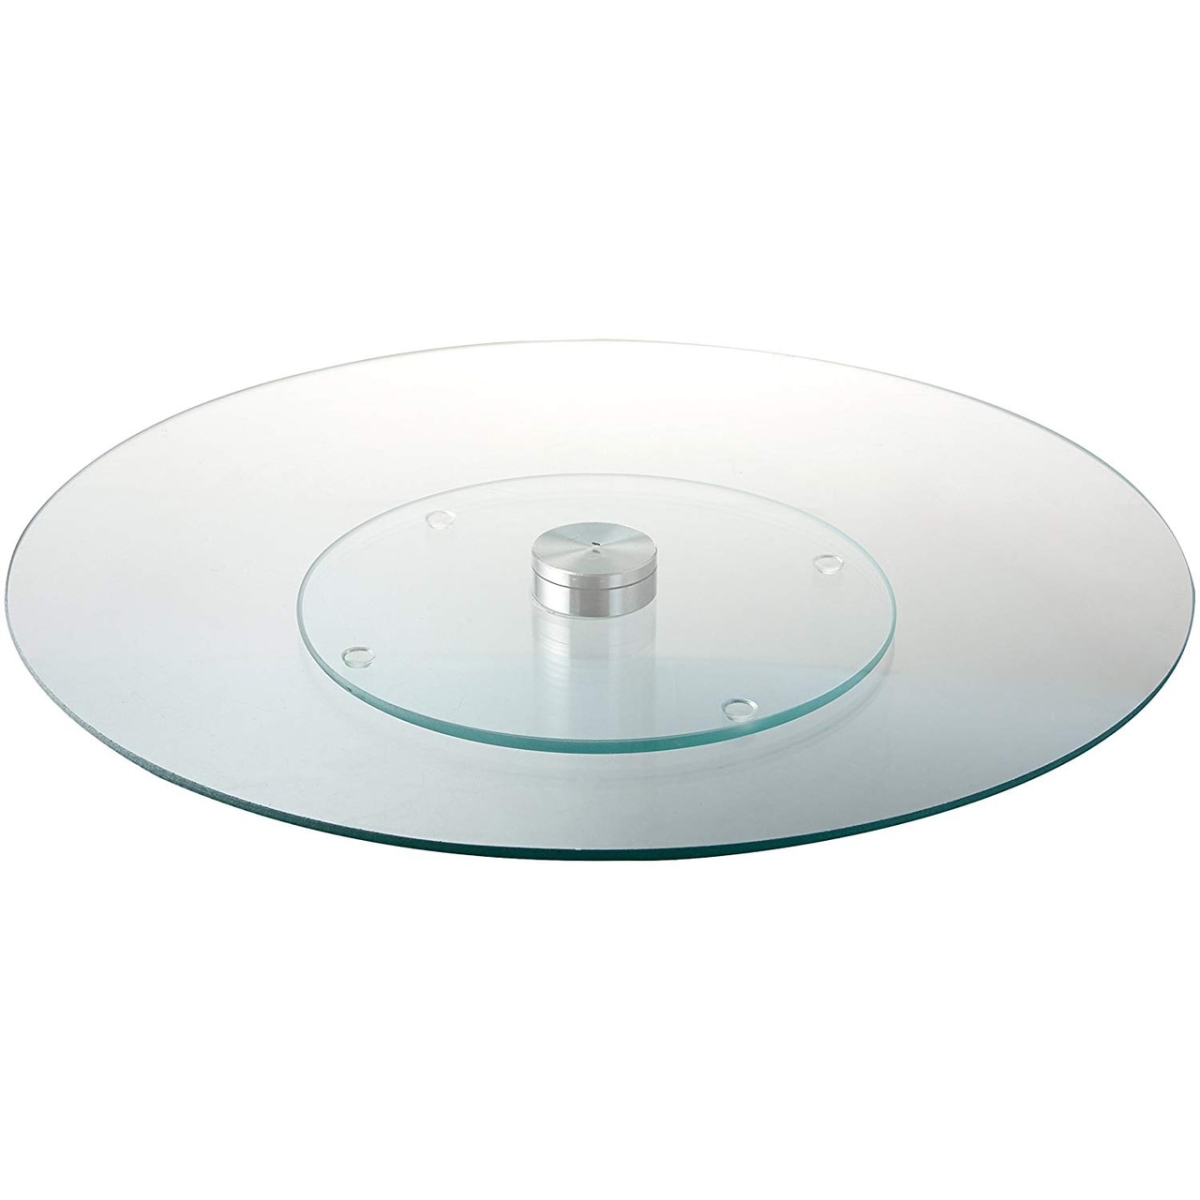 Ii-316 Tempered Glass Lazy Susan